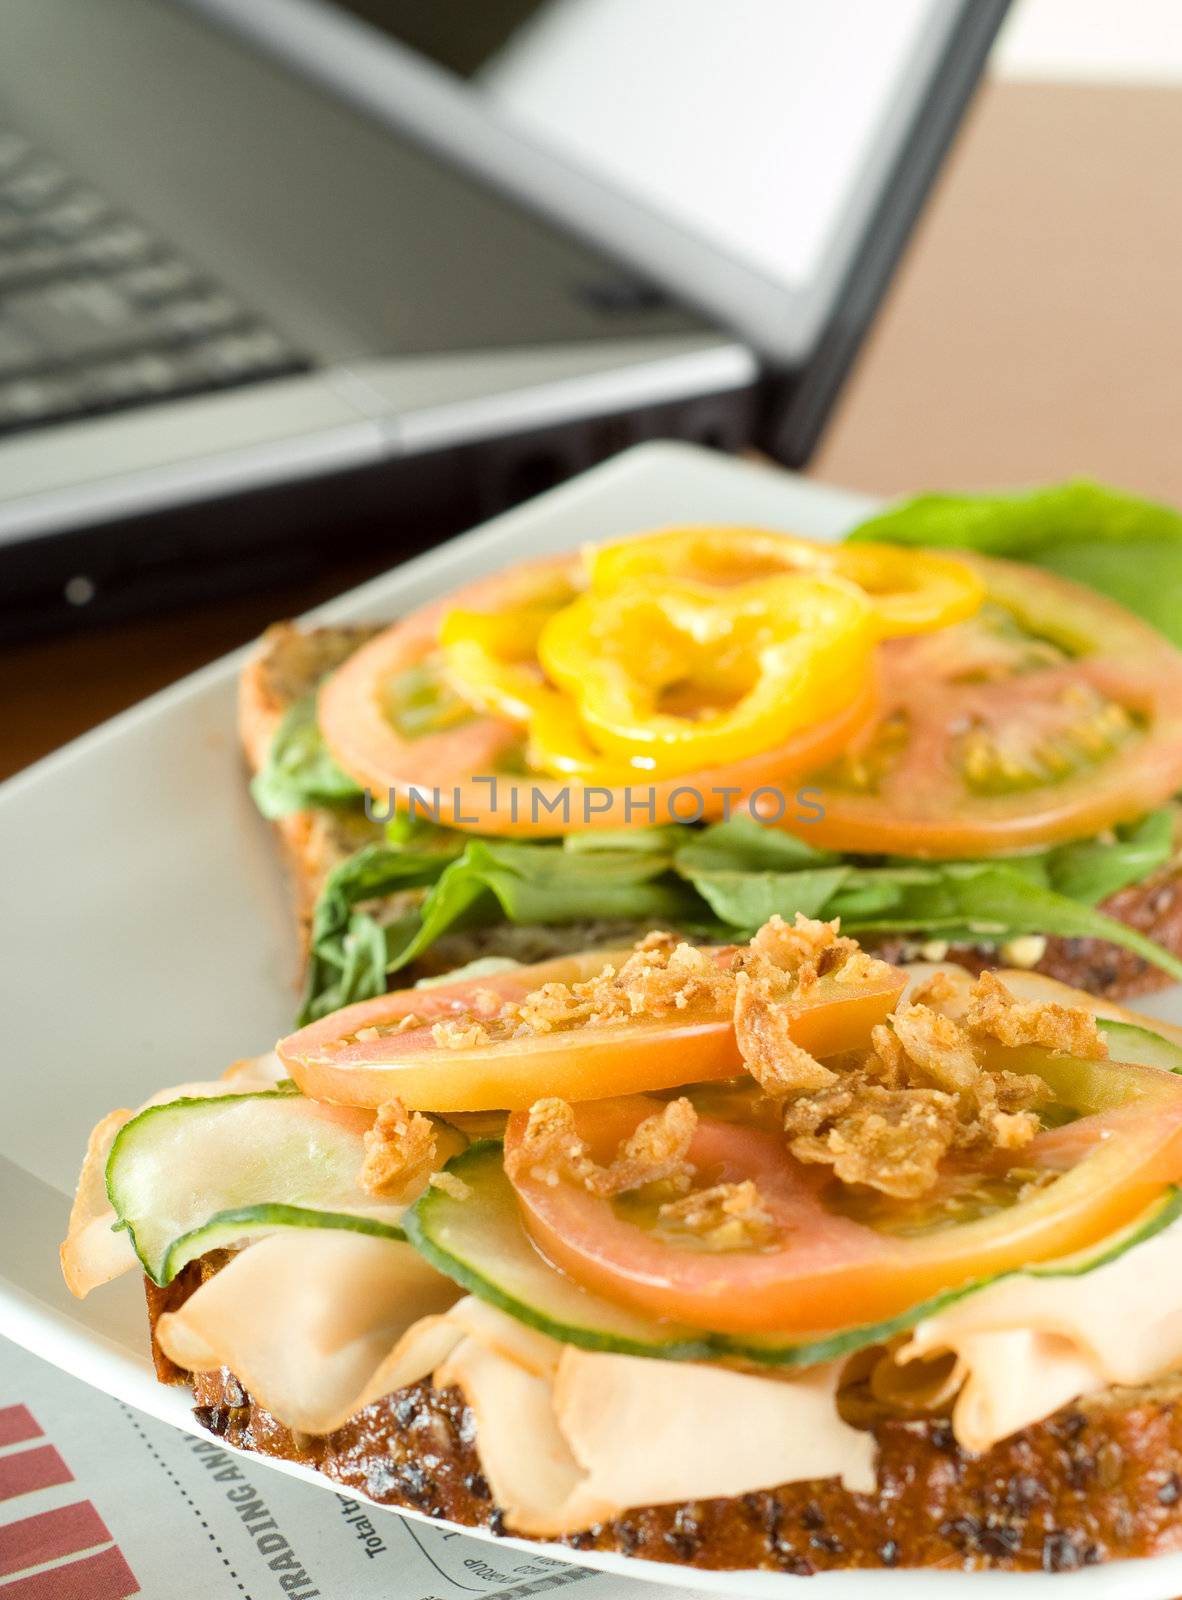 Office salad sandwich for lunch by alistaircotton